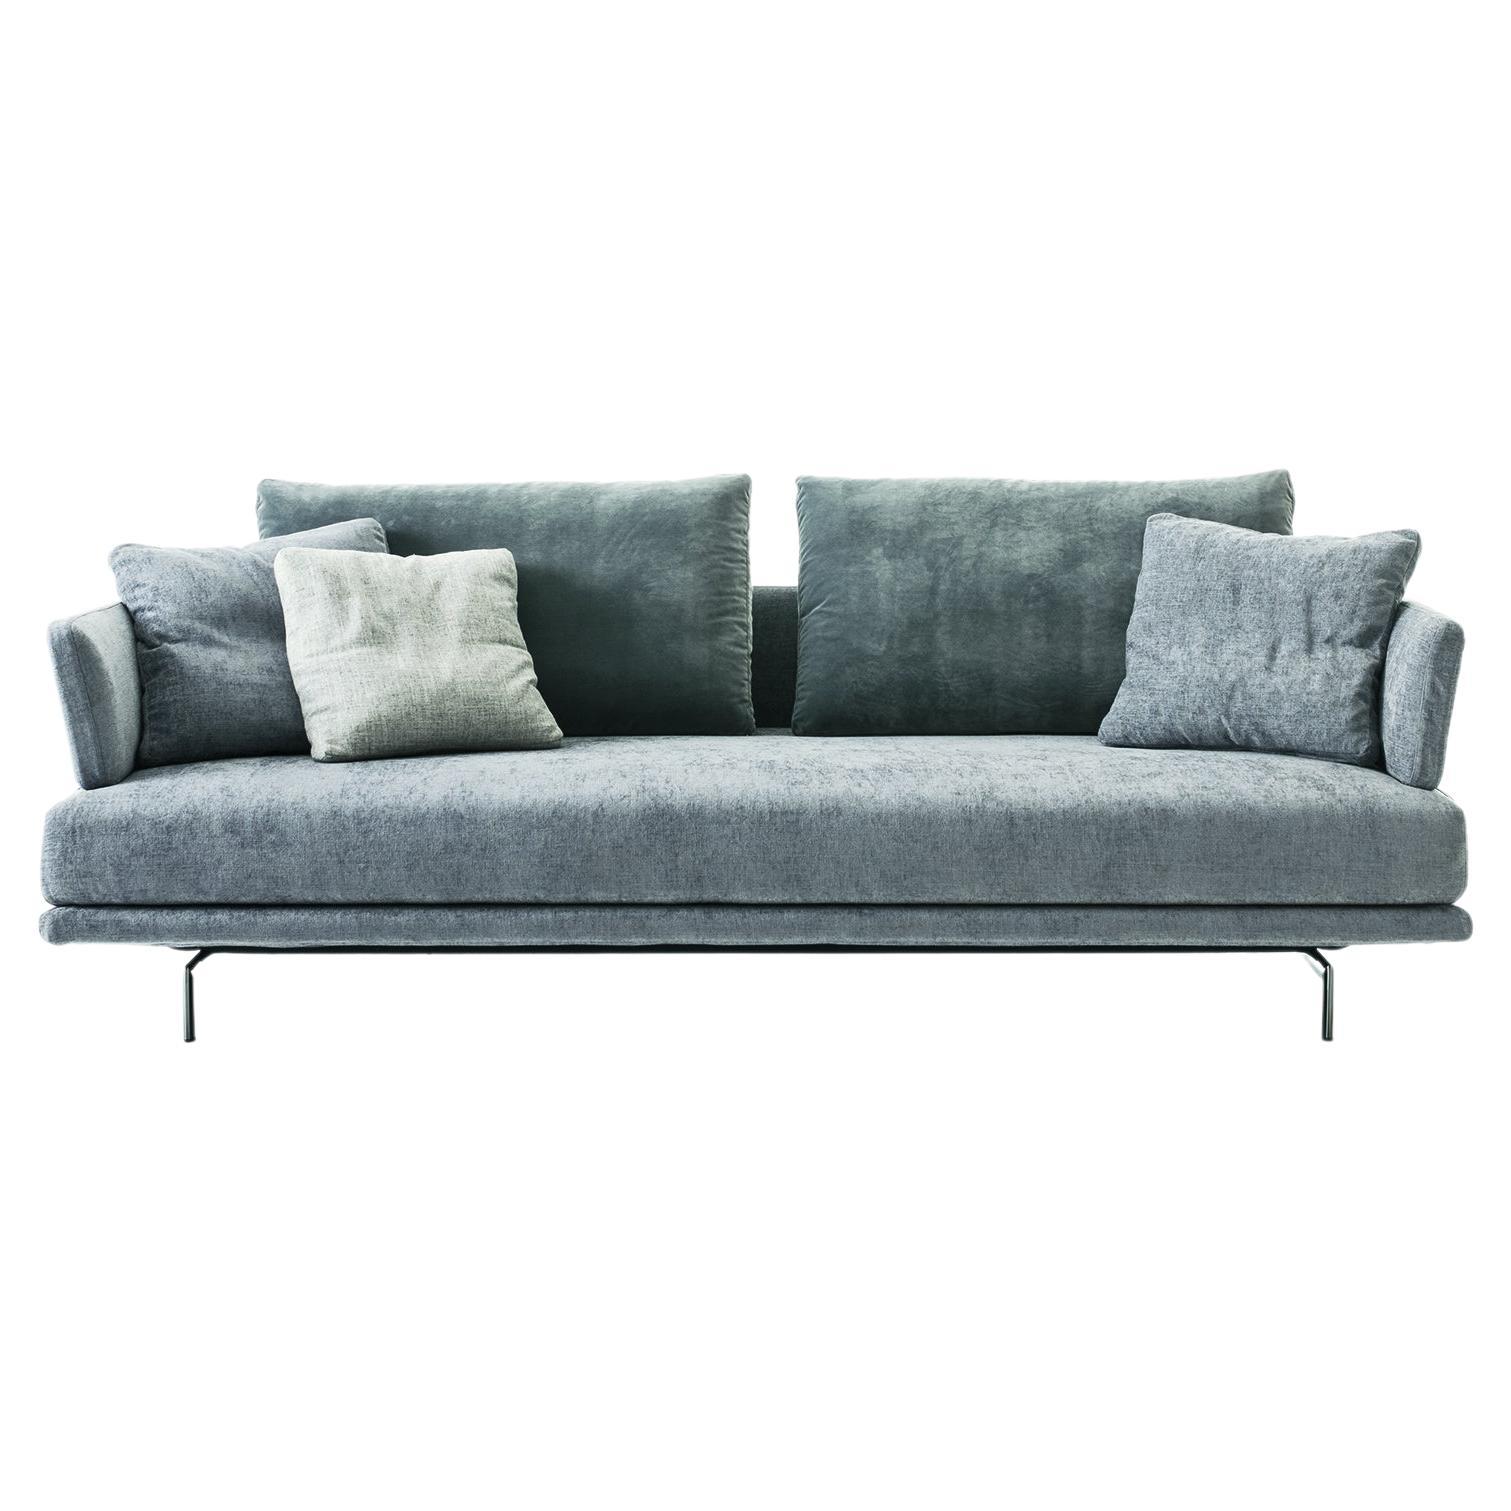 Quinta Strada 2-Seat Large Sofa in Clean Grey Upholstery by Sergio Bicego For Sale